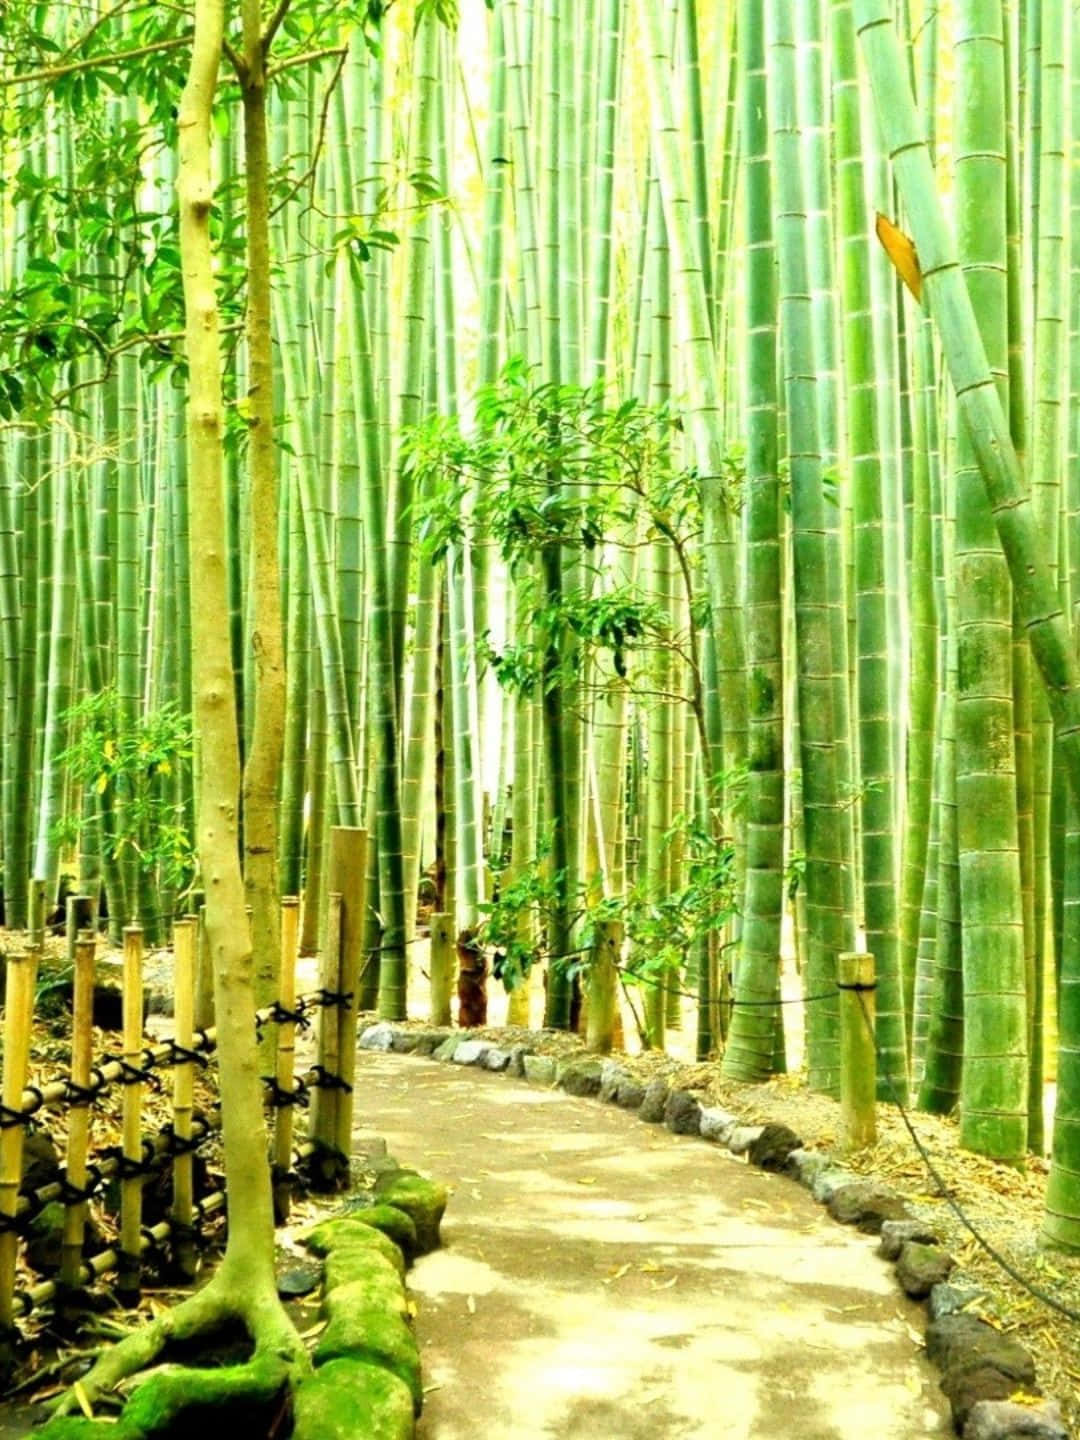 1440p Bamboo Background Hard Clean Path